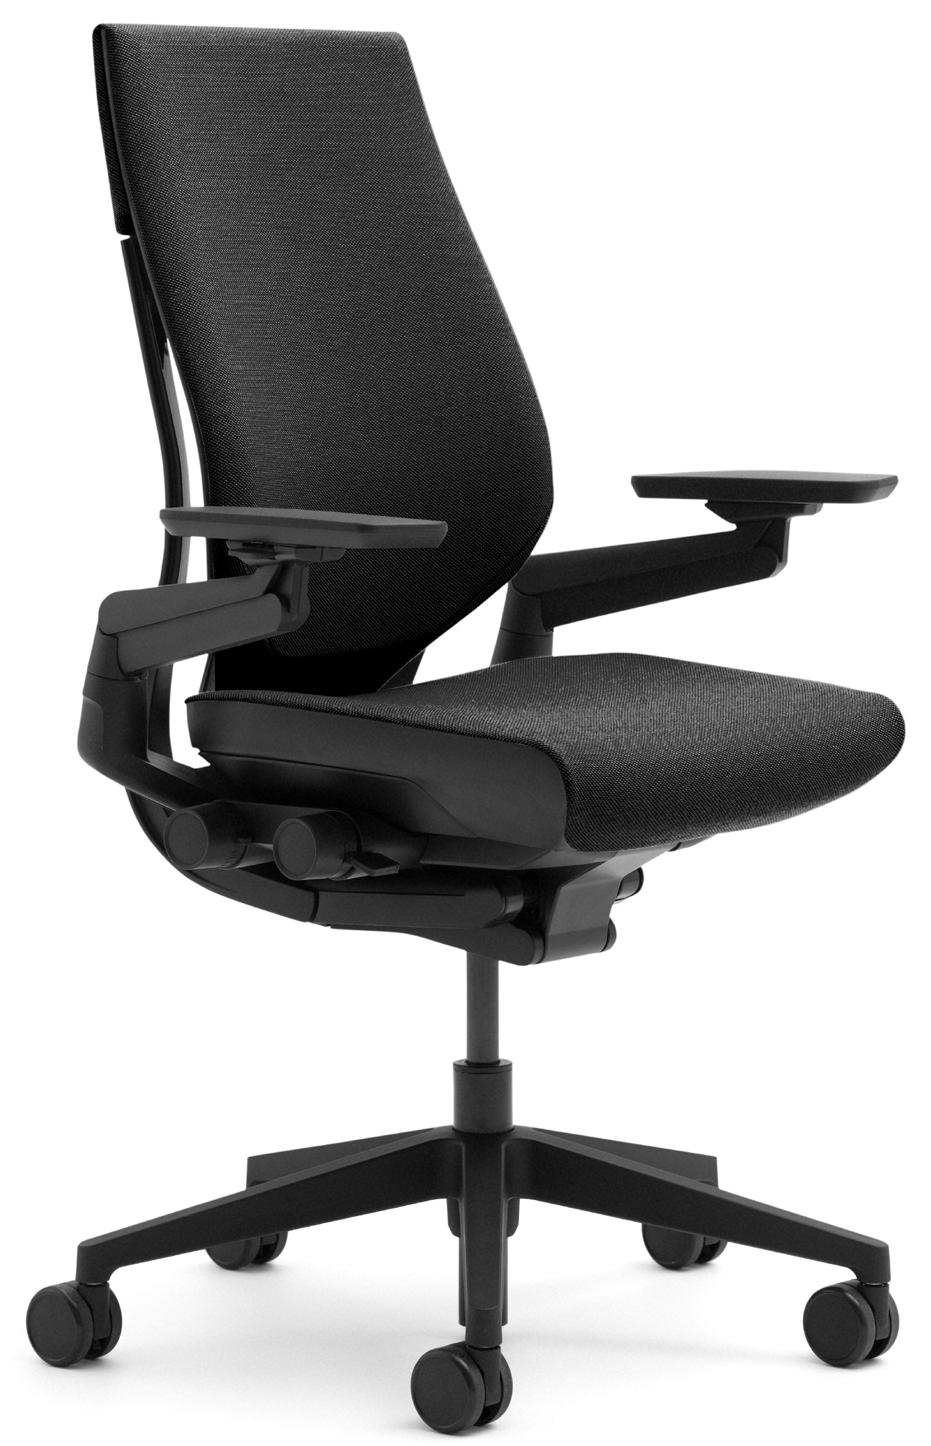 DISCOUNTED Steelcase Gesture Built to accommodate the specific postures we use with mobile devices, the Steelcase Gesture features 360 arms with unparalleled range of motion.